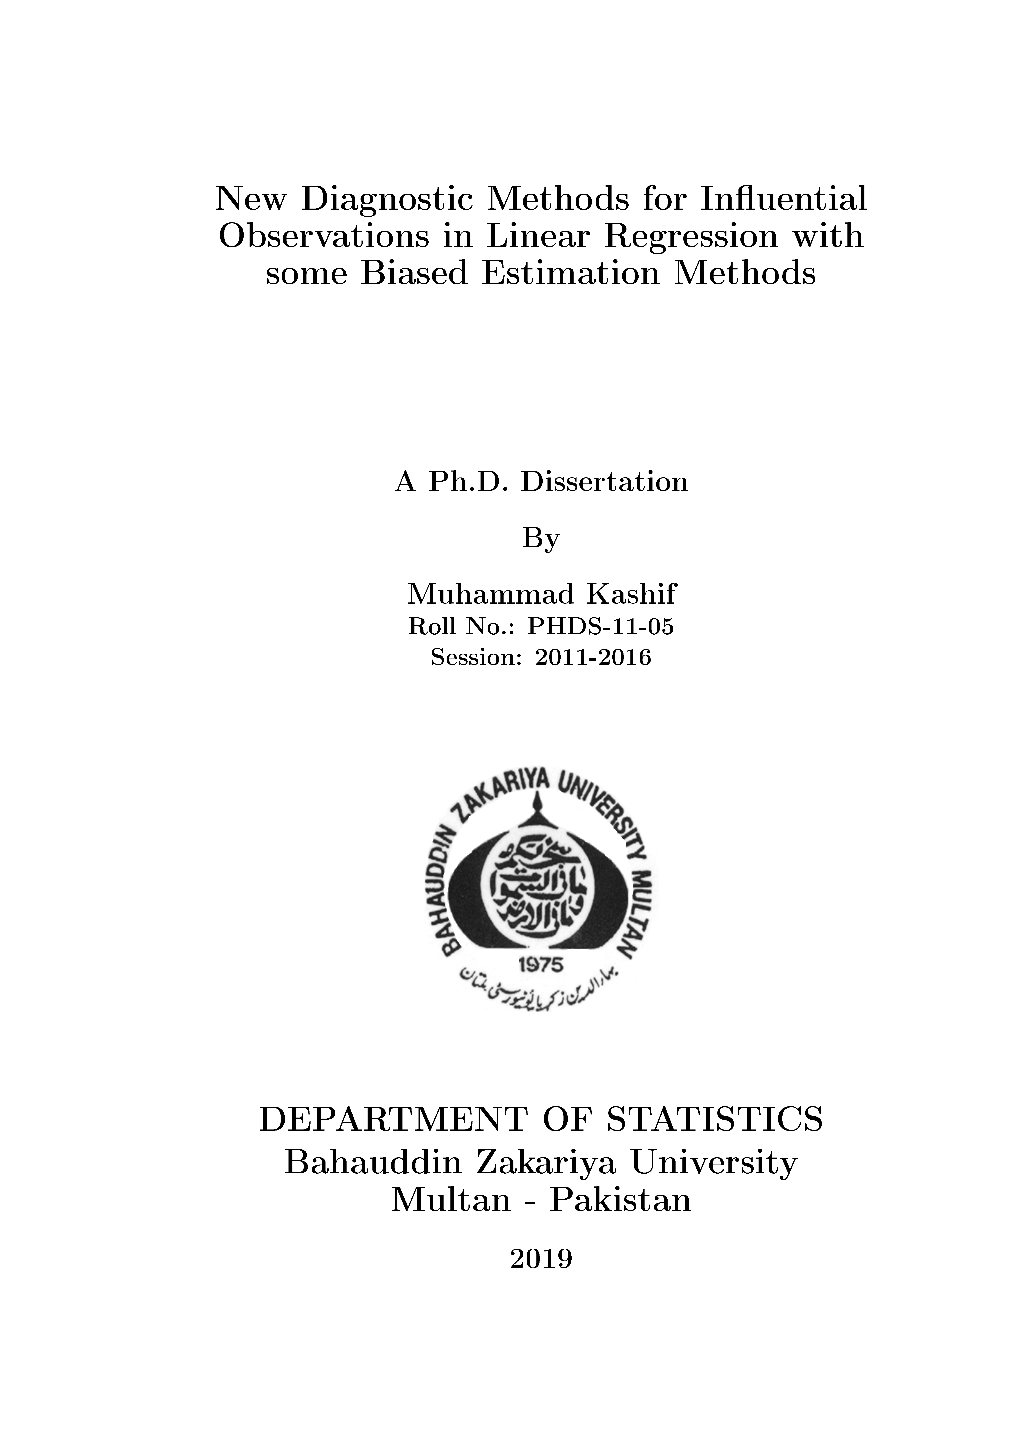 New Diagnostic Methods for in Uential Observations in Linear Regression